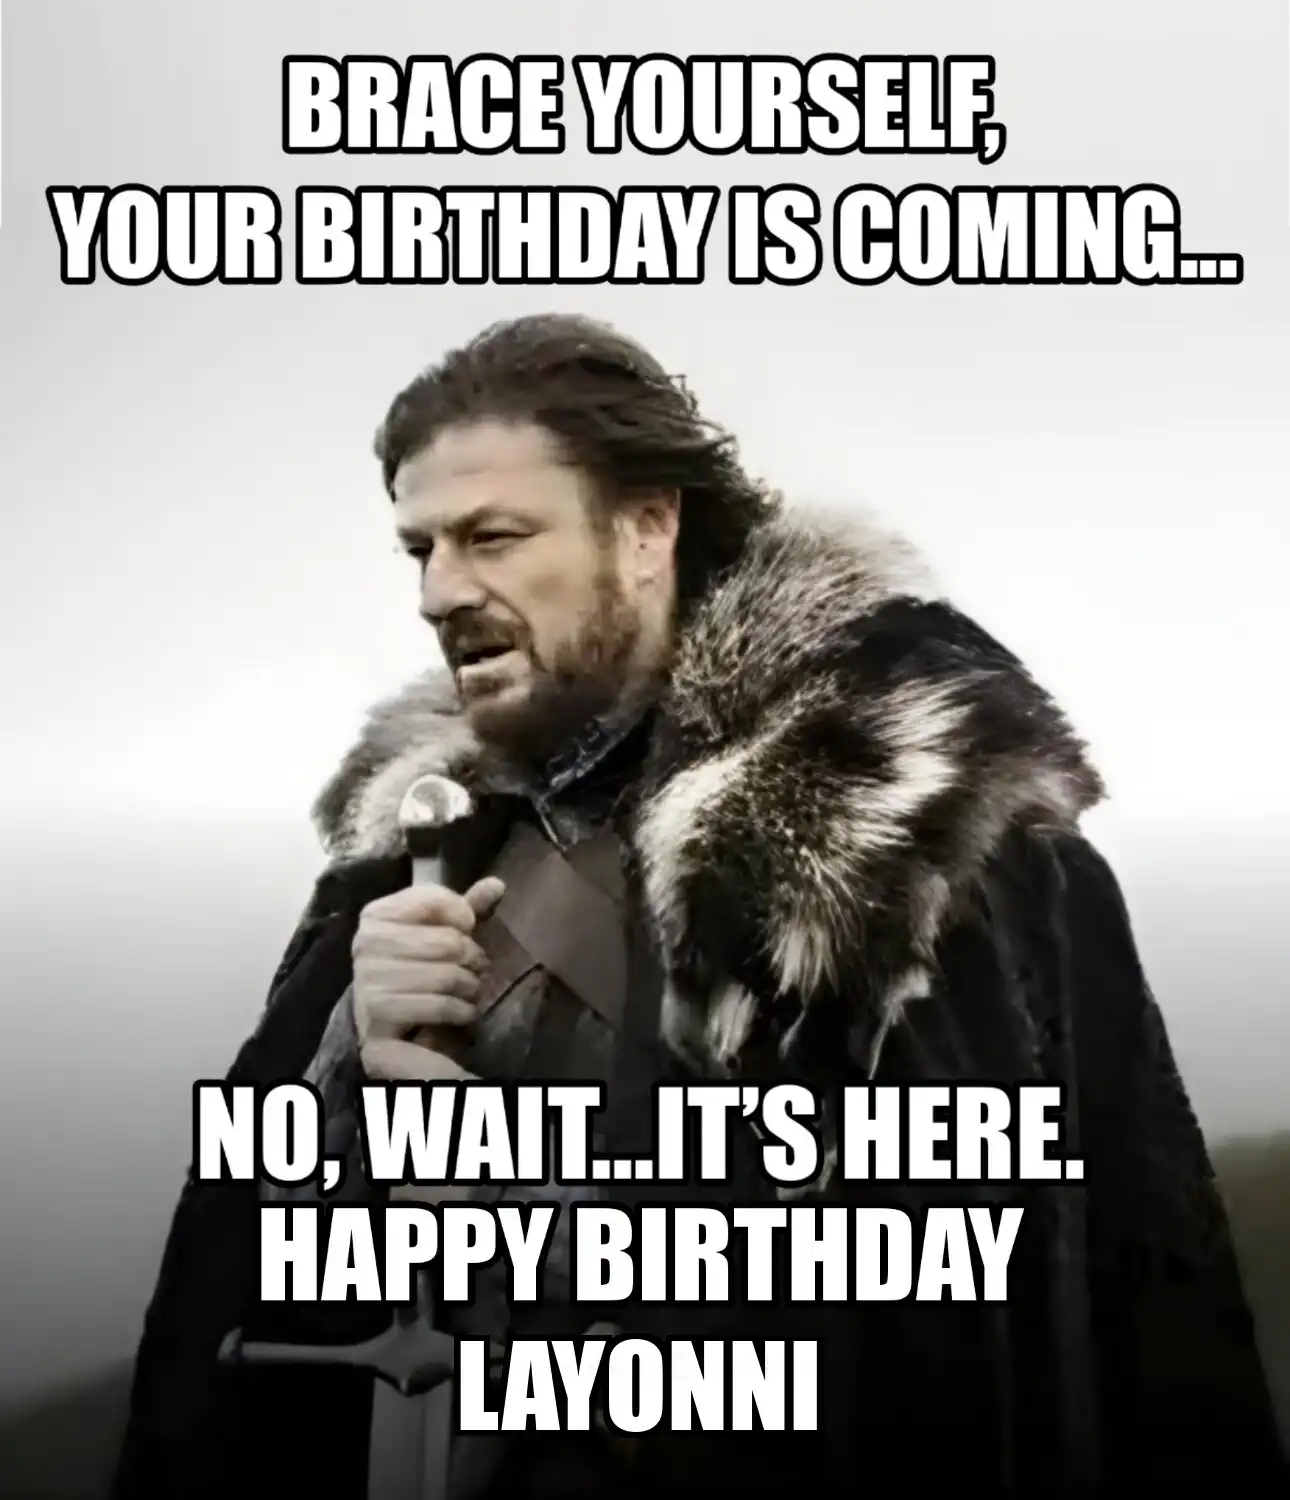 Happy Birthday Layonni Brace Yourself Your Birthday Is Coming Meme